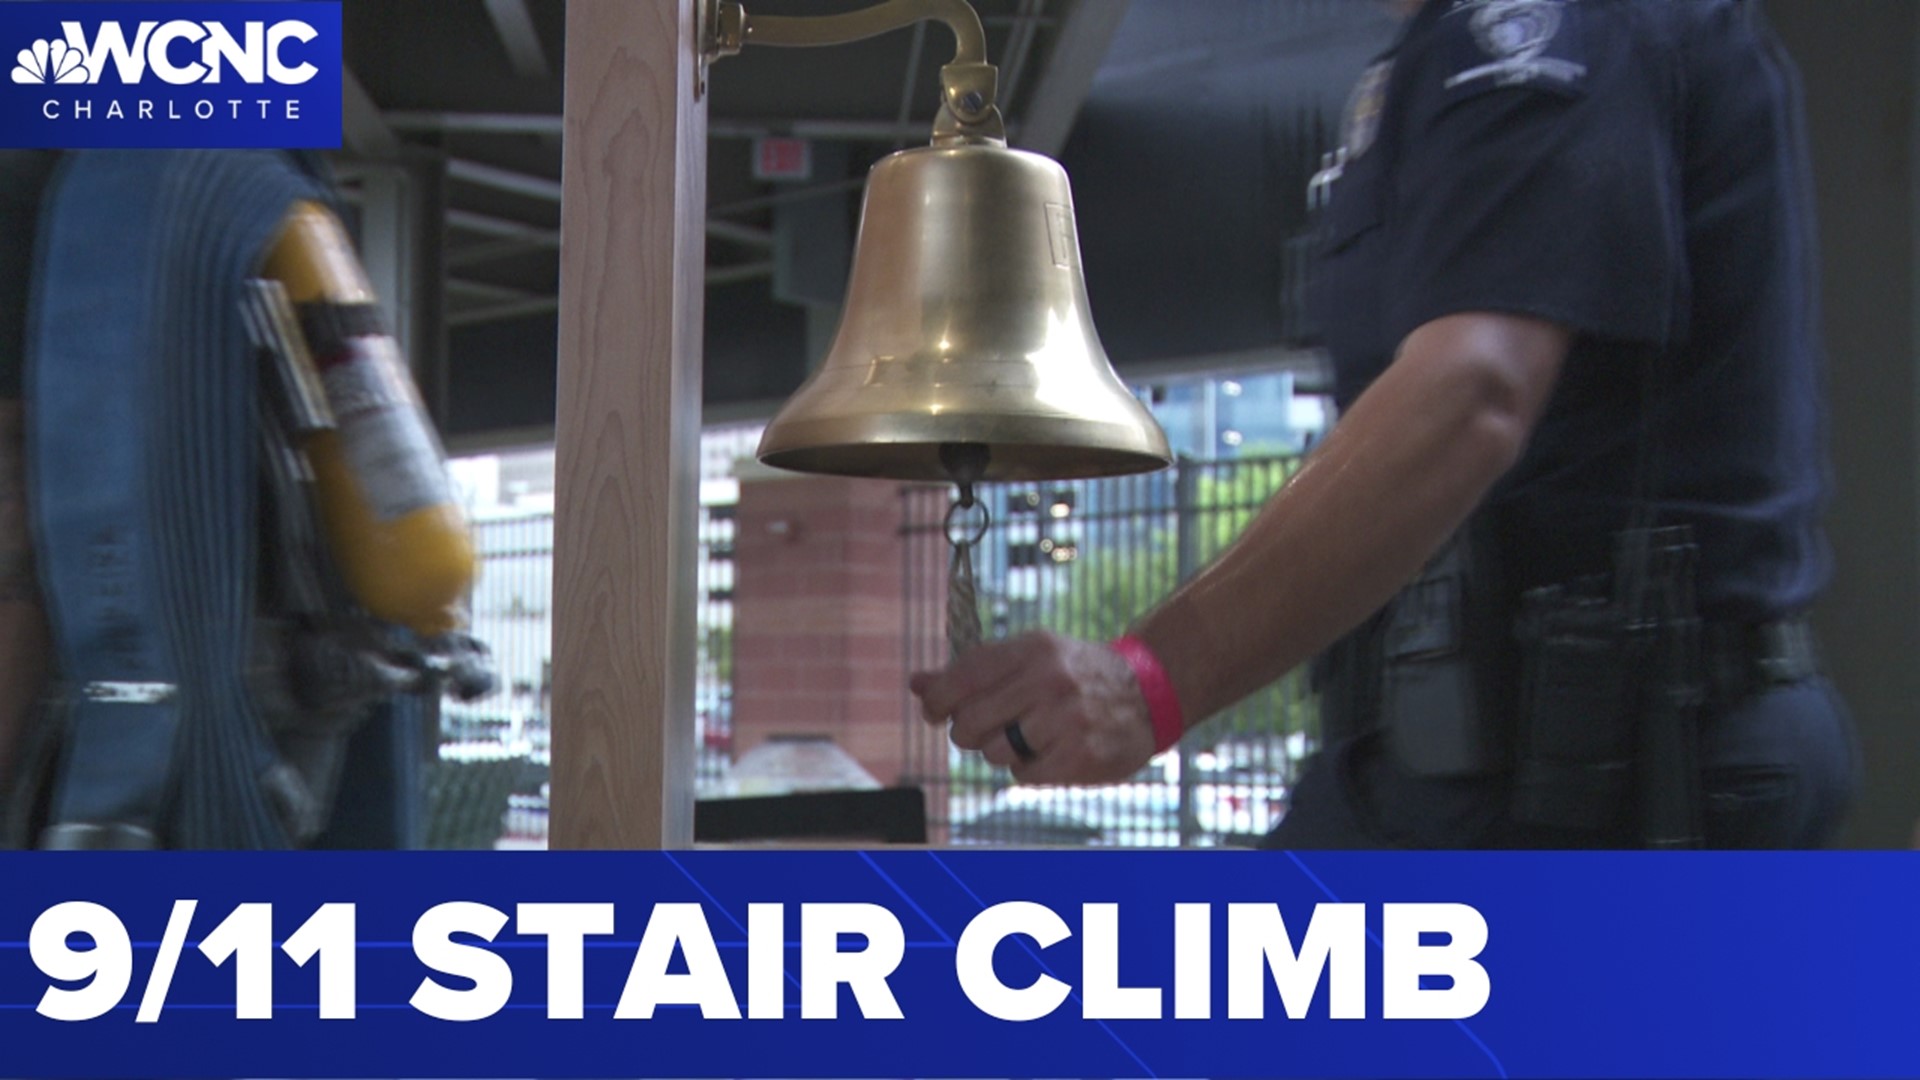 The climb at Truist Field was one way for firefighters and community members to honor those who responded to the collapse of the Twin Towers.